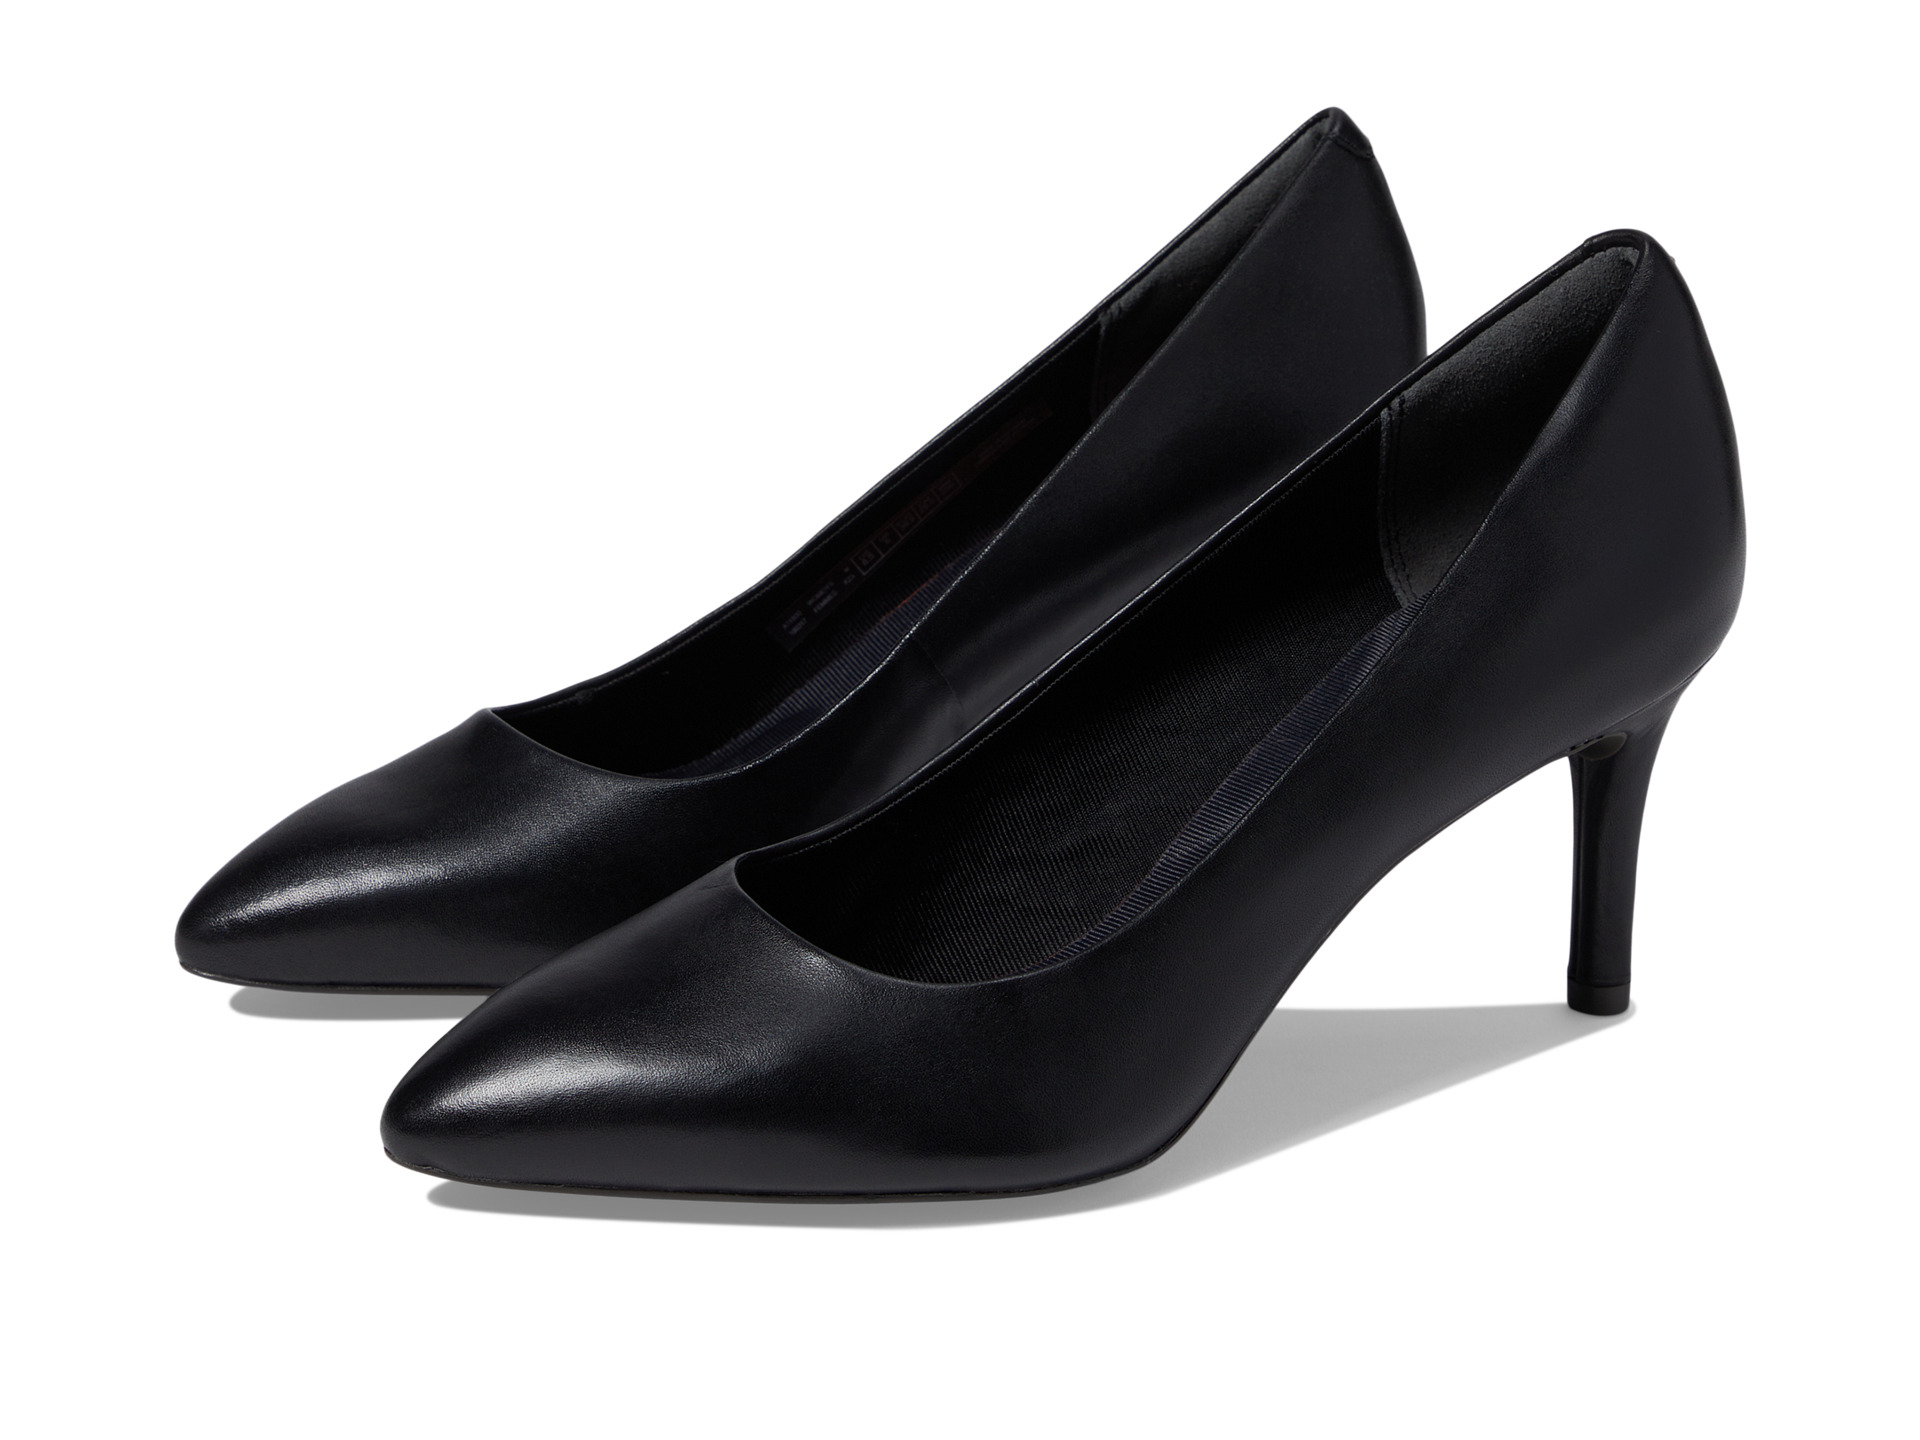 Rockport Total Motion 75mm Pointy Toe Pump at Zappos.com